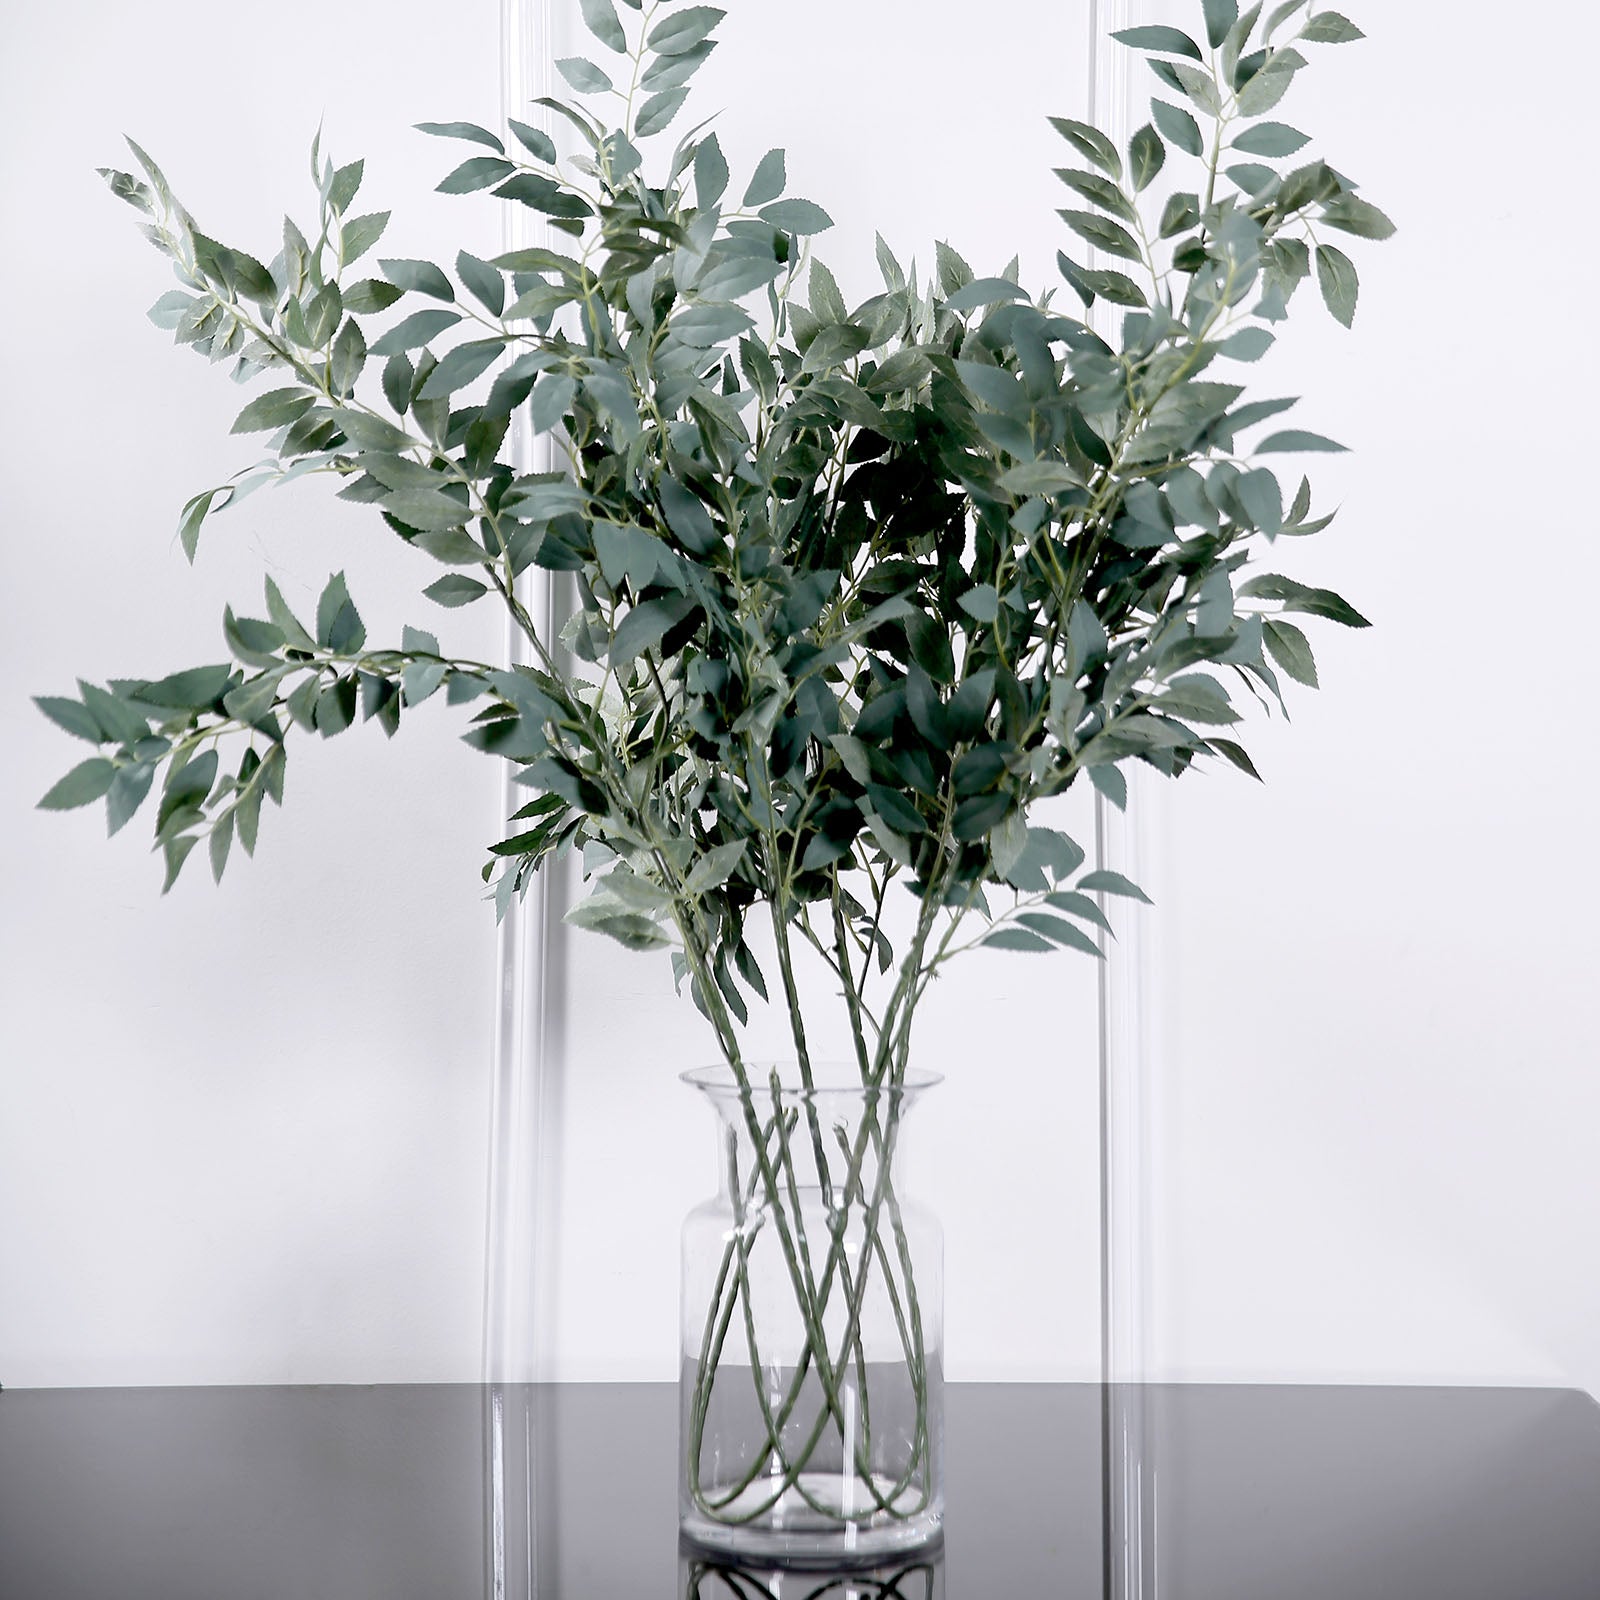 Efavormart 2 Bushes  42 Tall Light Green Artificial Silk Plant Stem Vase  Fillers, Faux Beech Leaf Branches for Table, Banquet, Wedding, Office,  Events, Centerpieces, Backdrops, and Stage Decor 